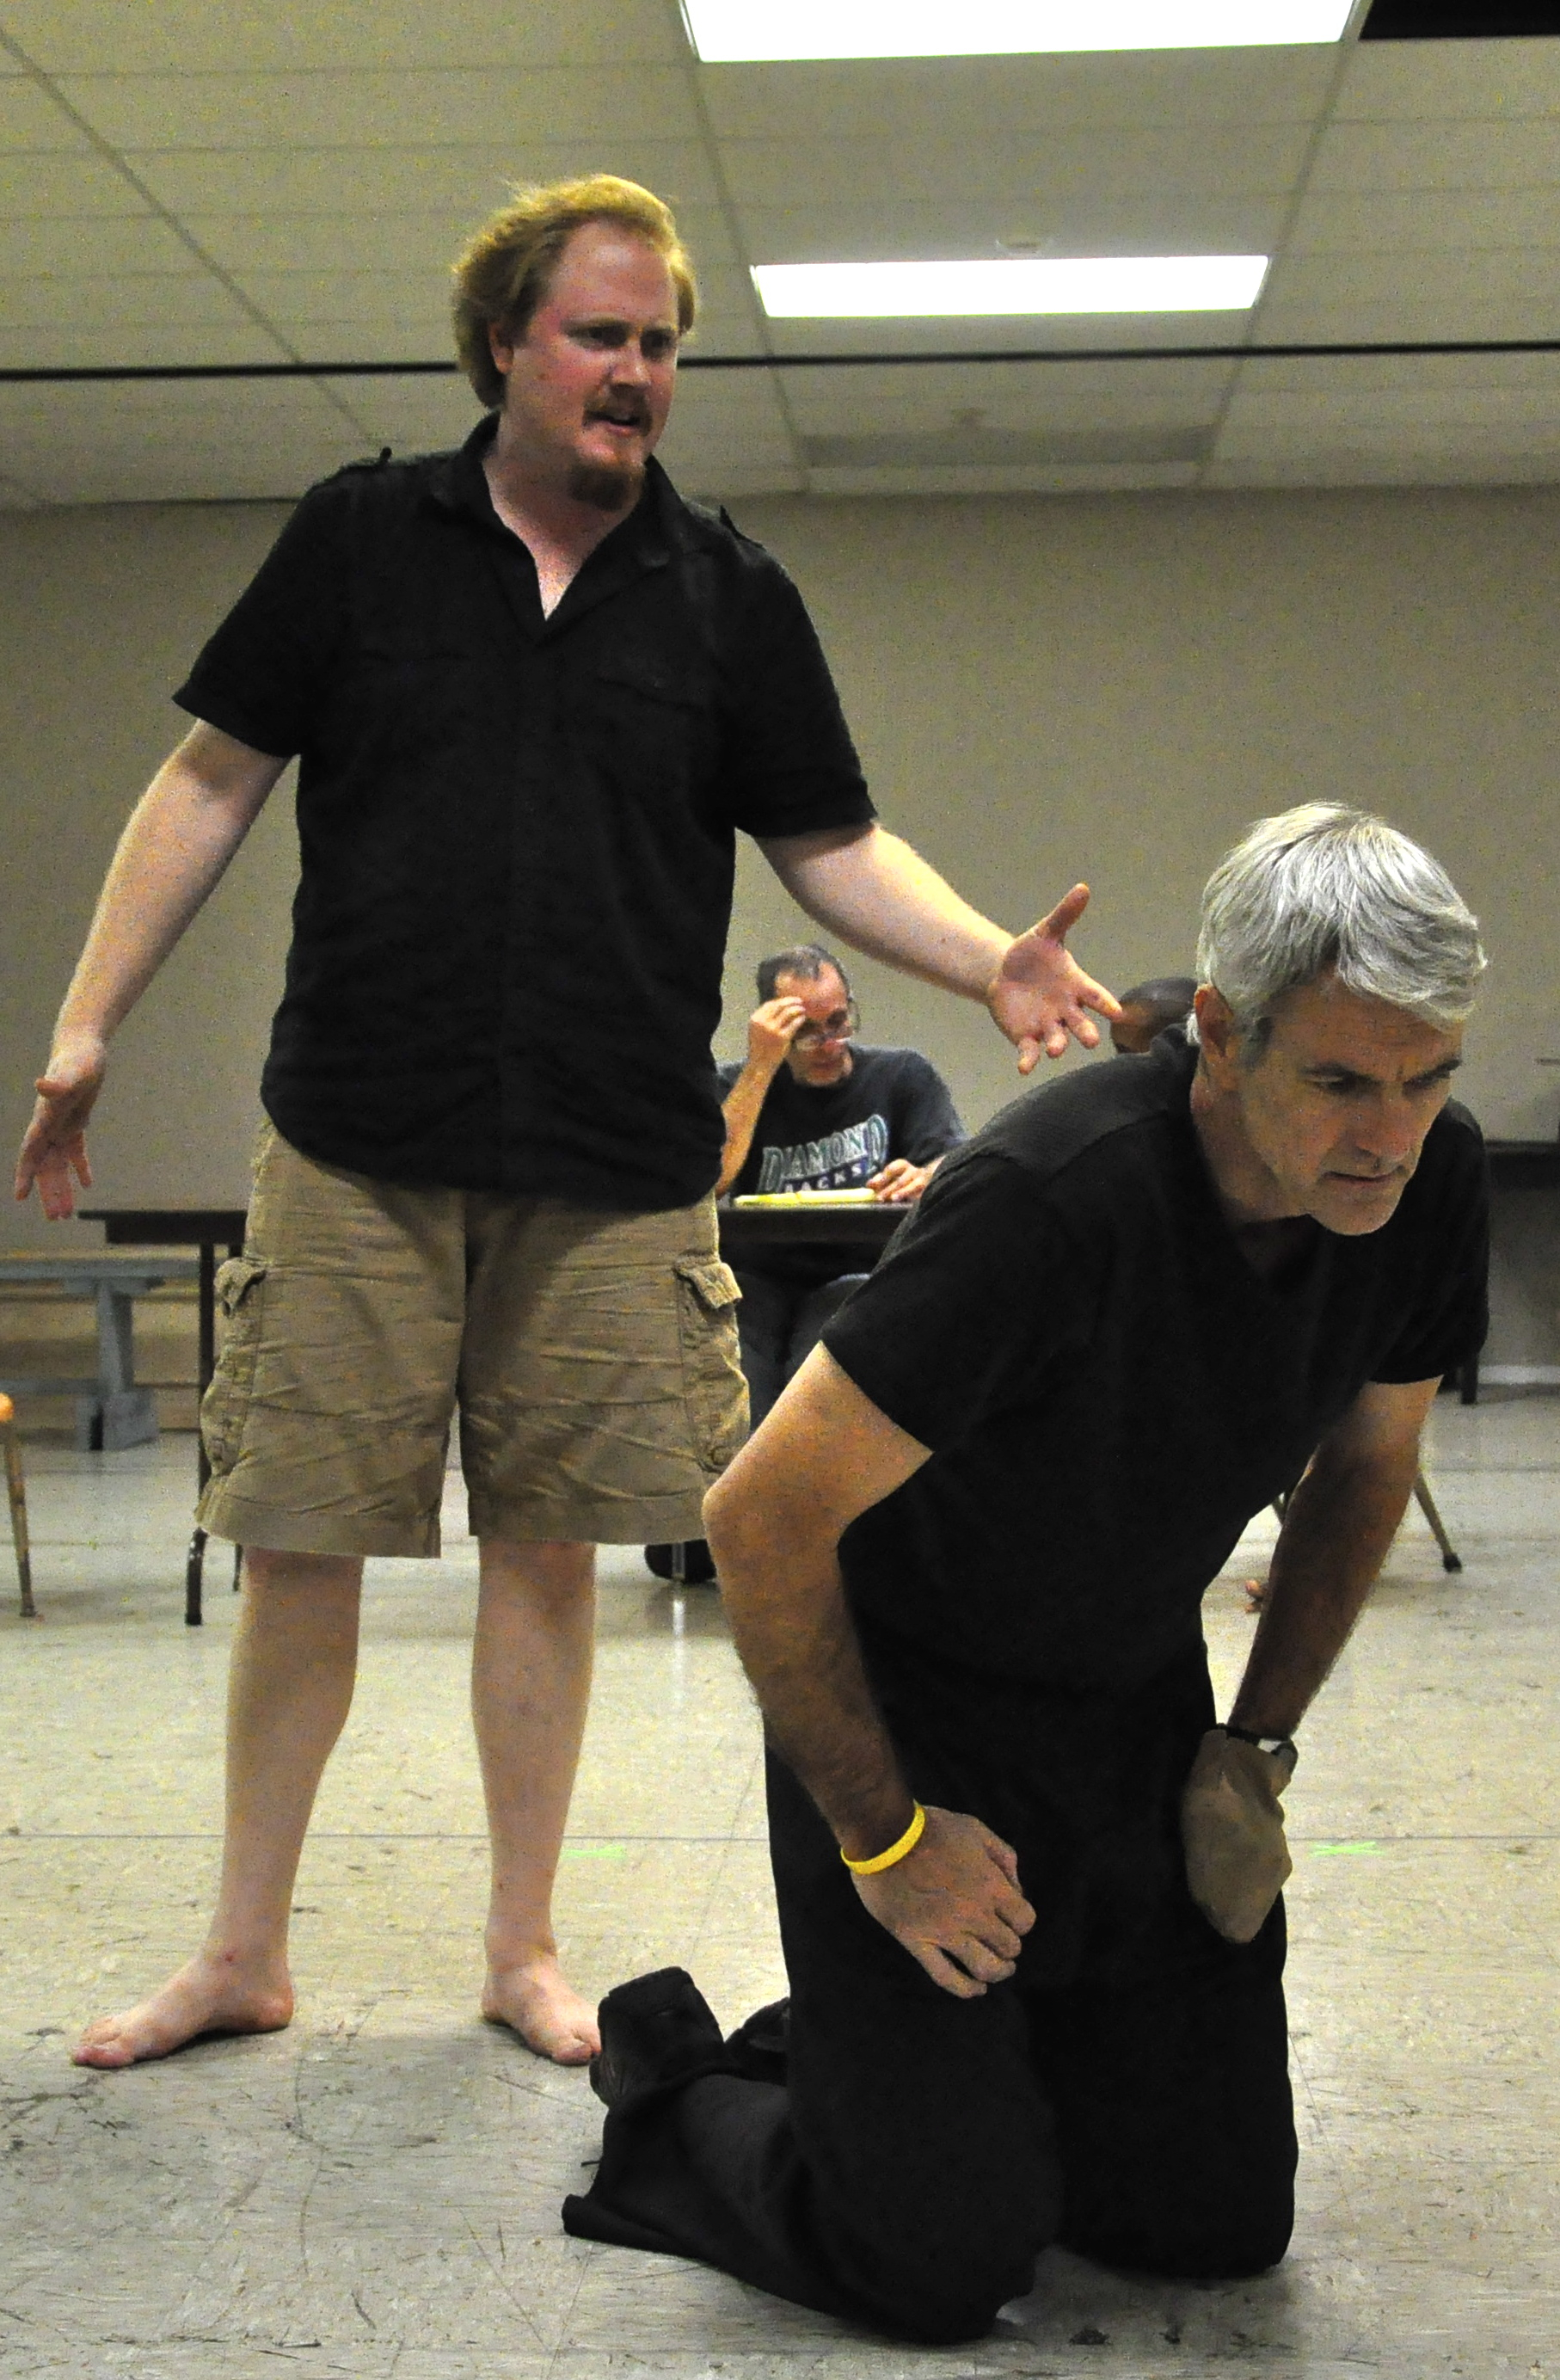 Randy Messersmith recreates his role of Titus Andronicus in the 2011 production at Southwest Shakespeare Company, a troupe he co-founded with friend Kevin Dressler. (Also pictured, Jesse James Kamps.)